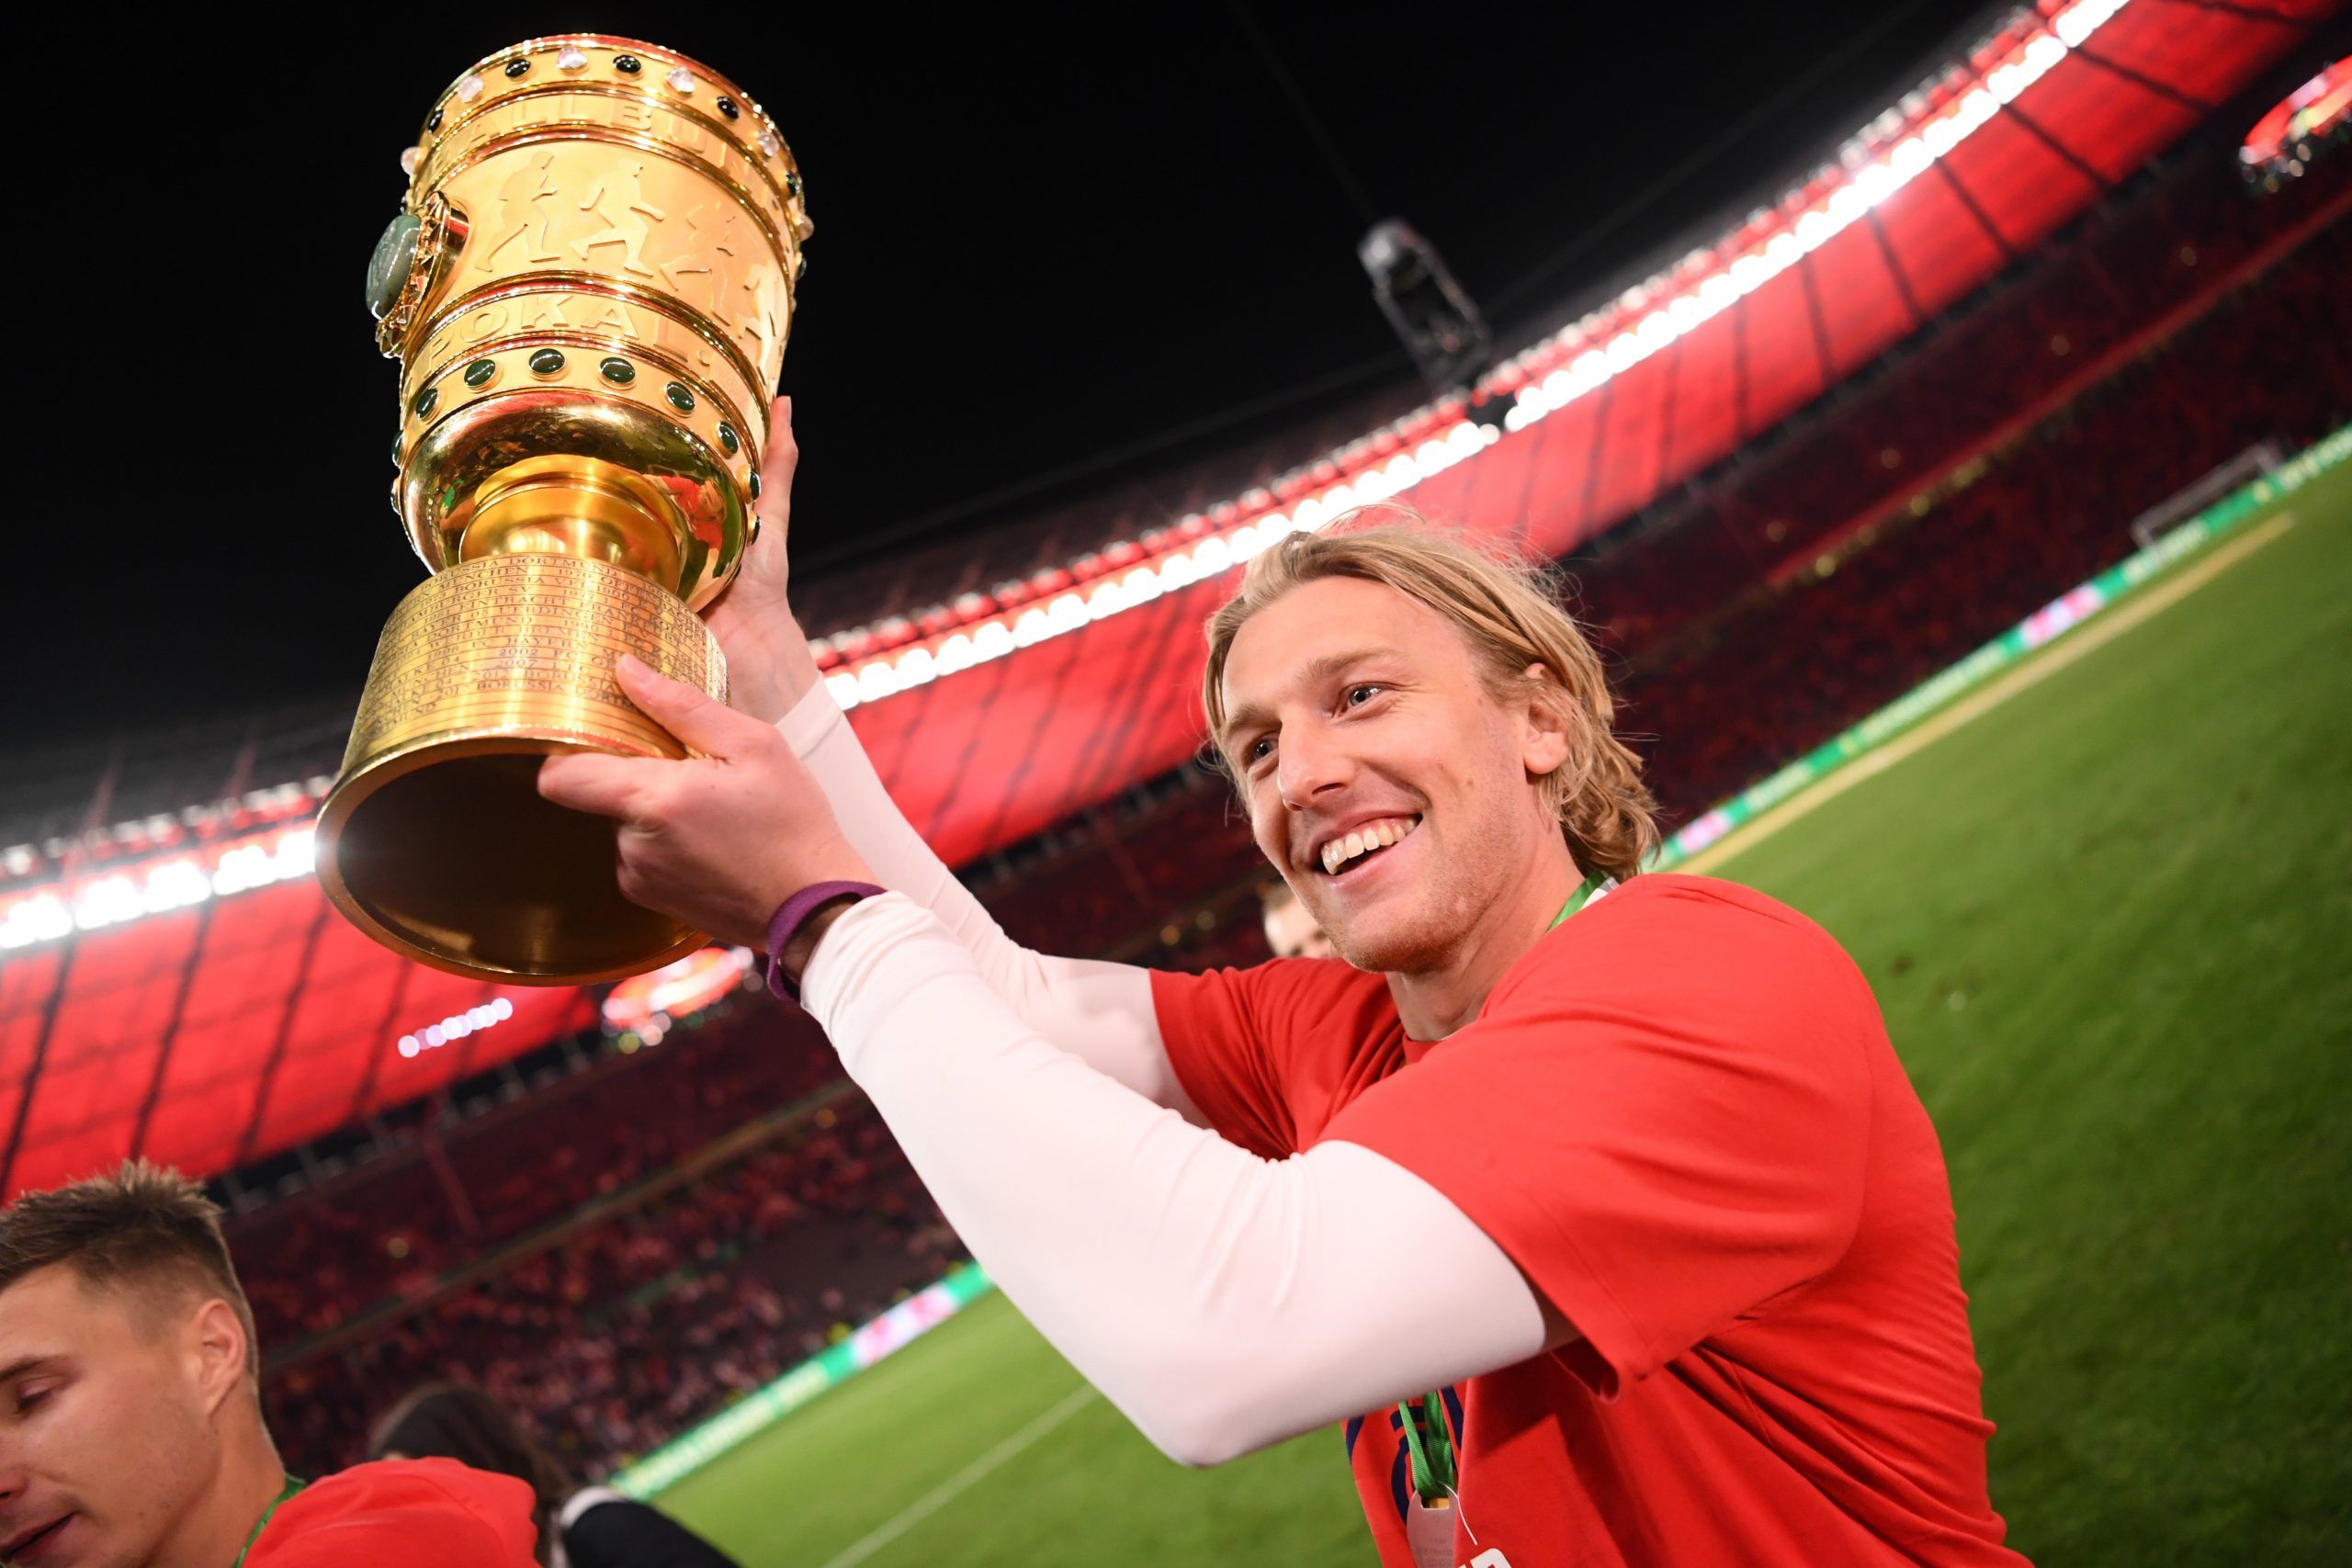 Soccer Football - DFB Cup - Final - SC Freiburg v RB Leipzig - Olympiastadion, Berlin, Germany - May 21, 2022  RB Leipzig's Emil Forsberg celebrates with the trophy after winning the final REUTERS/Annegret Hilse DFB REGULATIONS PROHIBIT ANY USE OF PHOTOGRAPHS AS IMAGE SEQUENCES AND/OR QUASI-VIDEO.